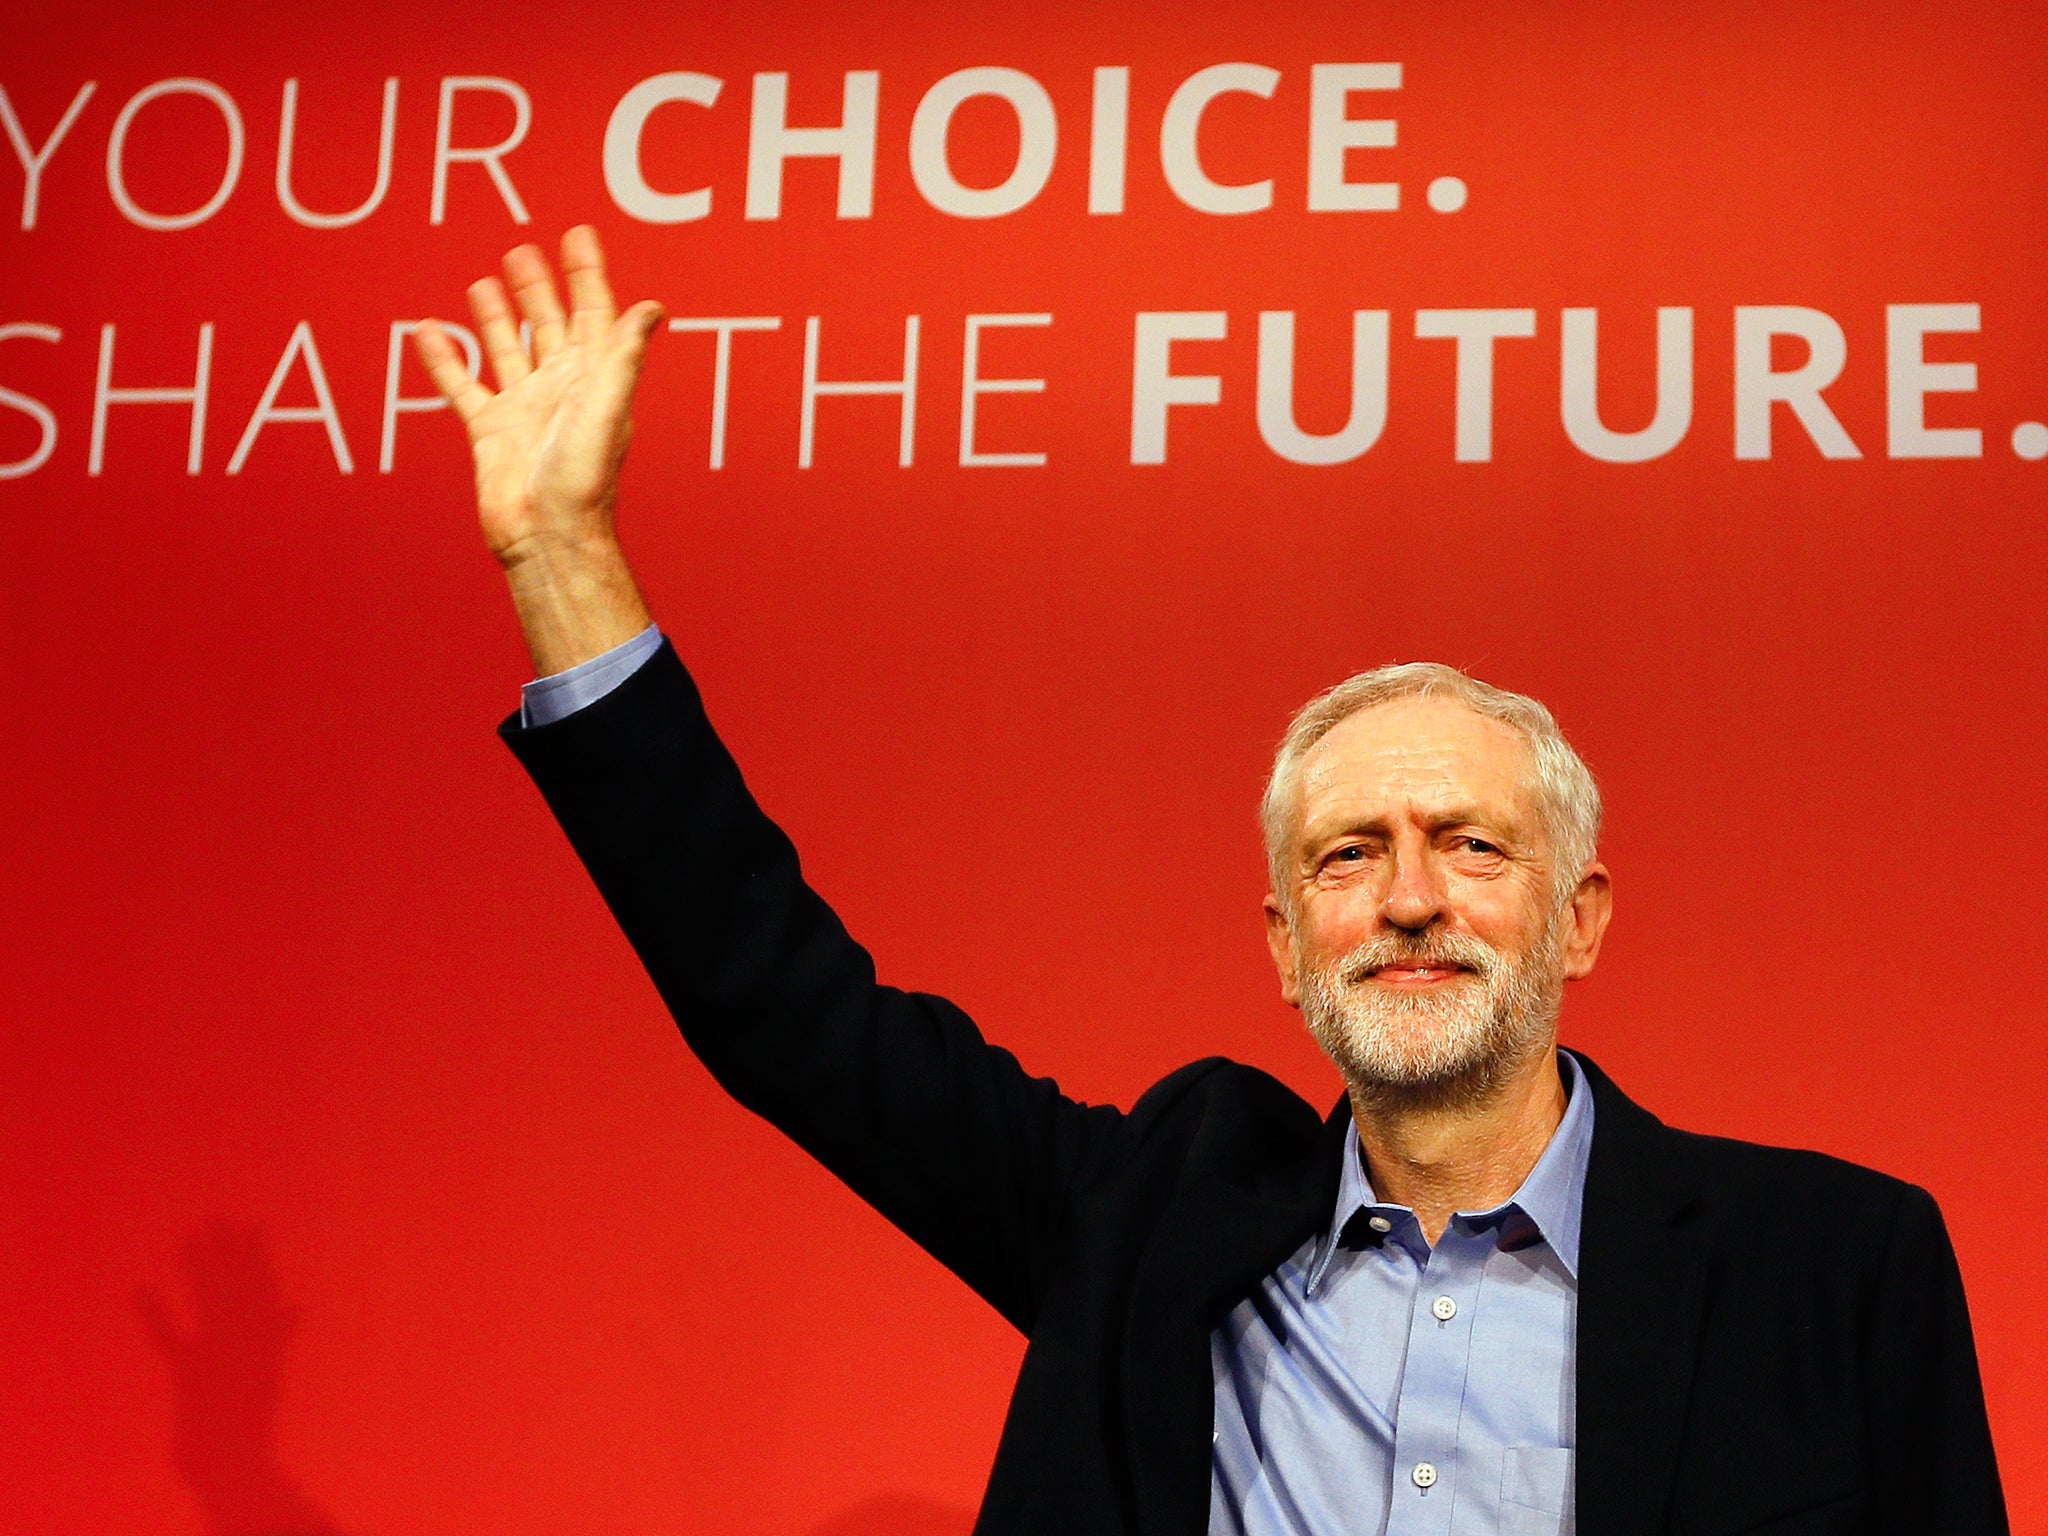 Jeremy Corbyn waves on stage after new is announced as the new leader of The Labour Party during the Labour Party Leadership Conference in London